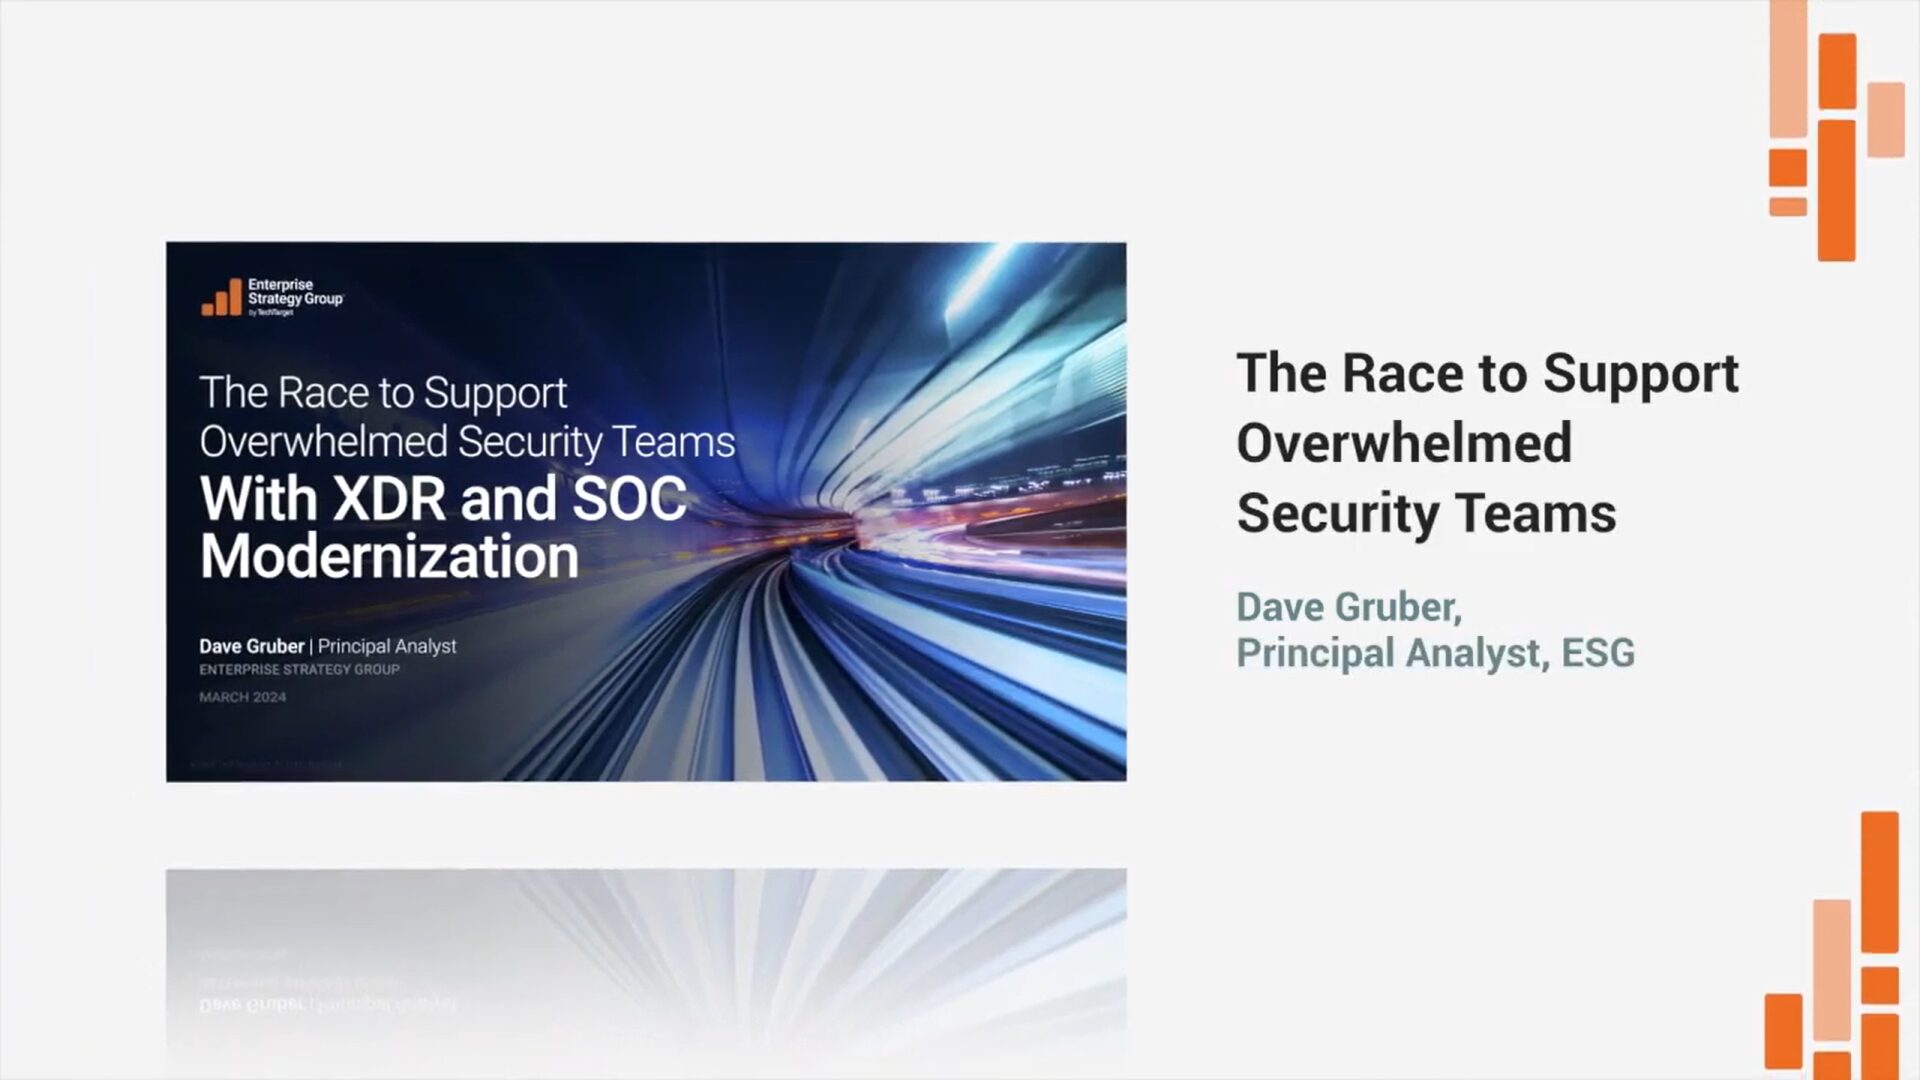 The Race to Support Overwhelmed Security Teams with XDR and SOC Modernization